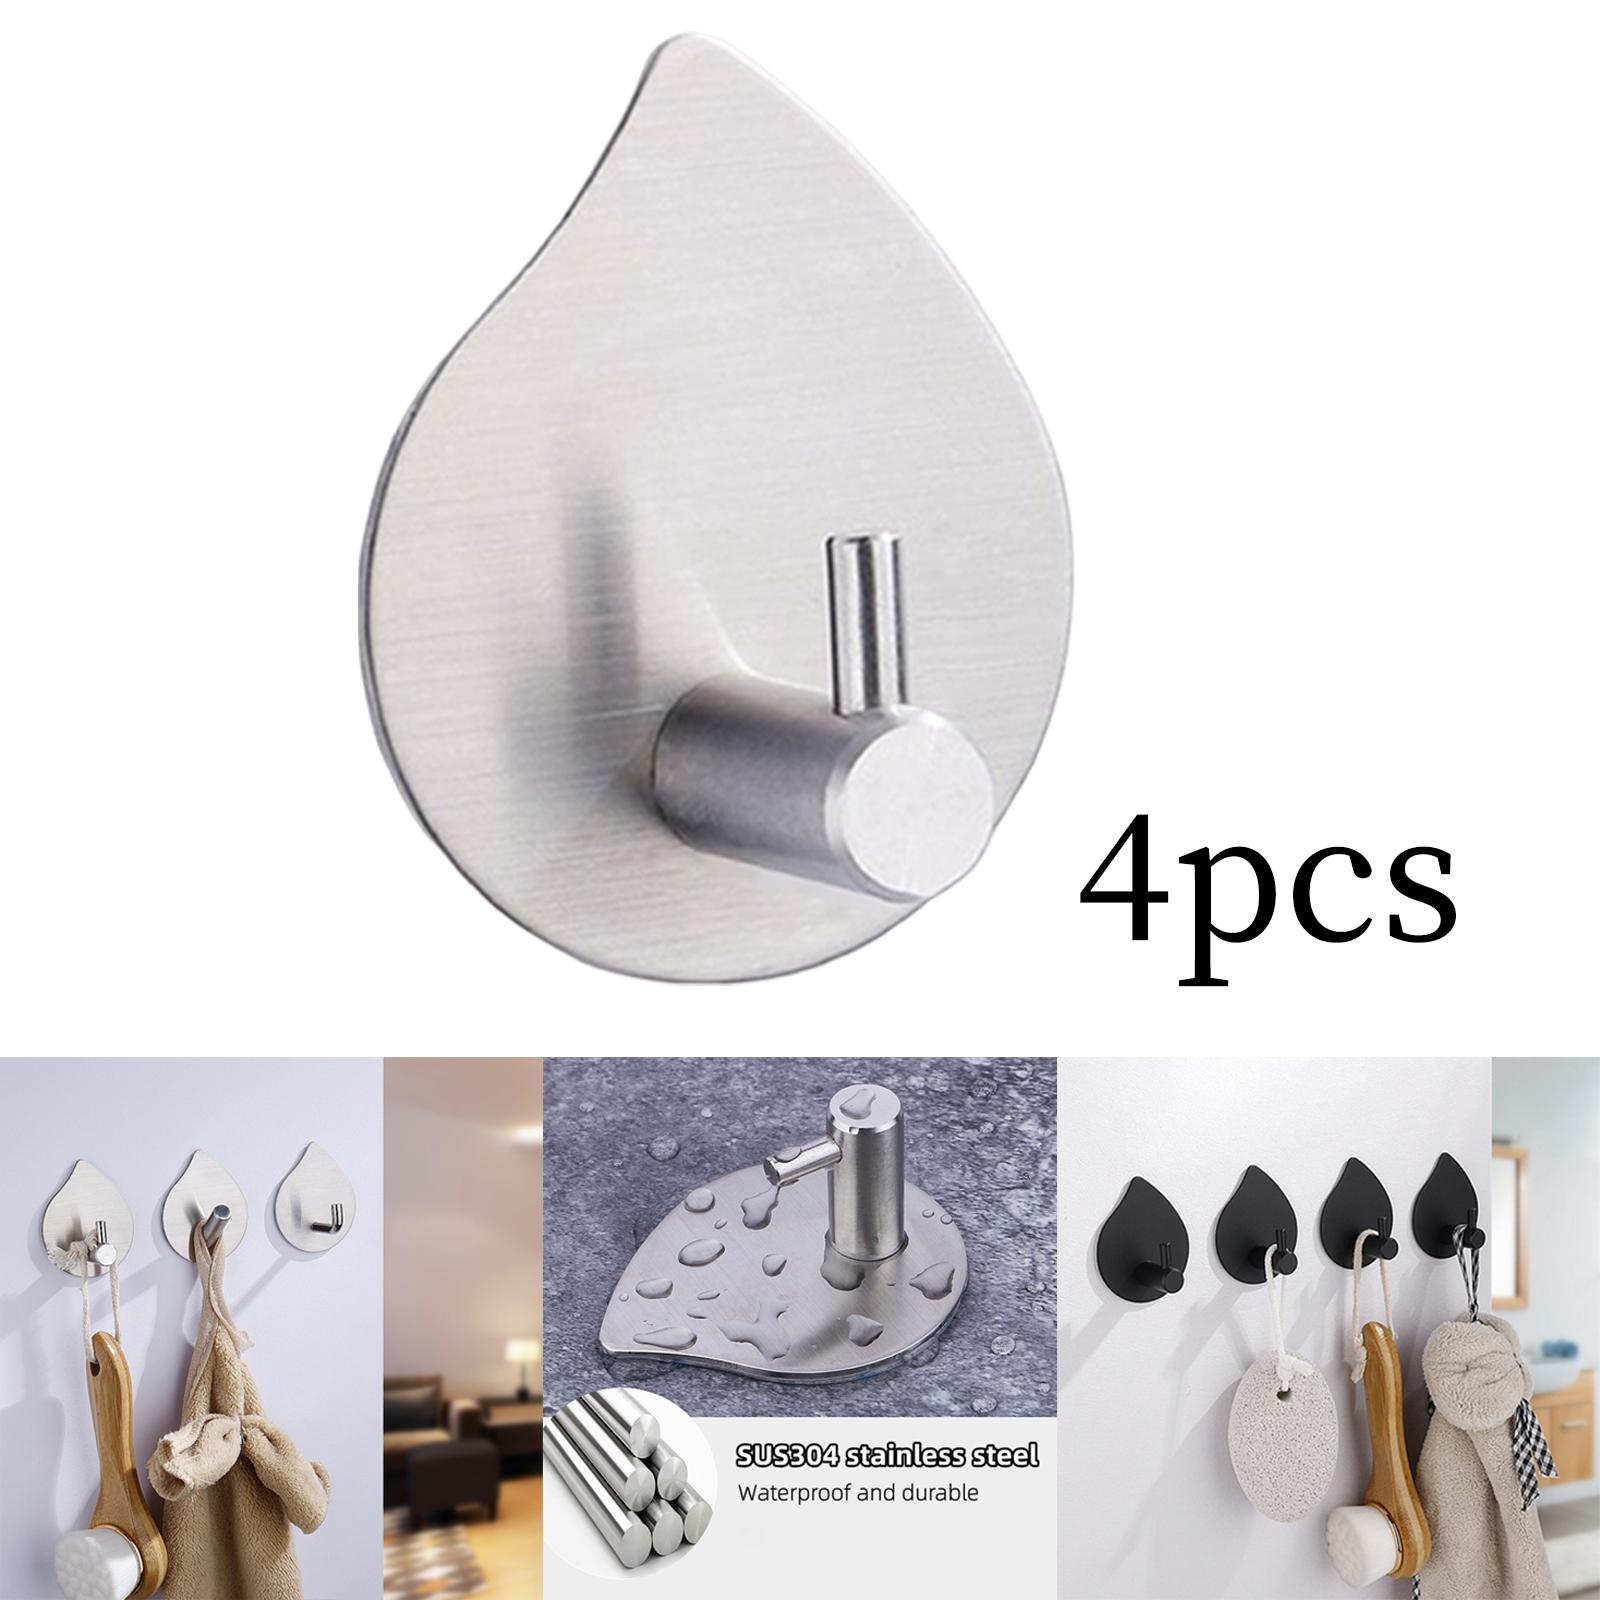 4Pcs Adhesive Hooks Waterproof Stainless Steel No Drilling Strong Silver